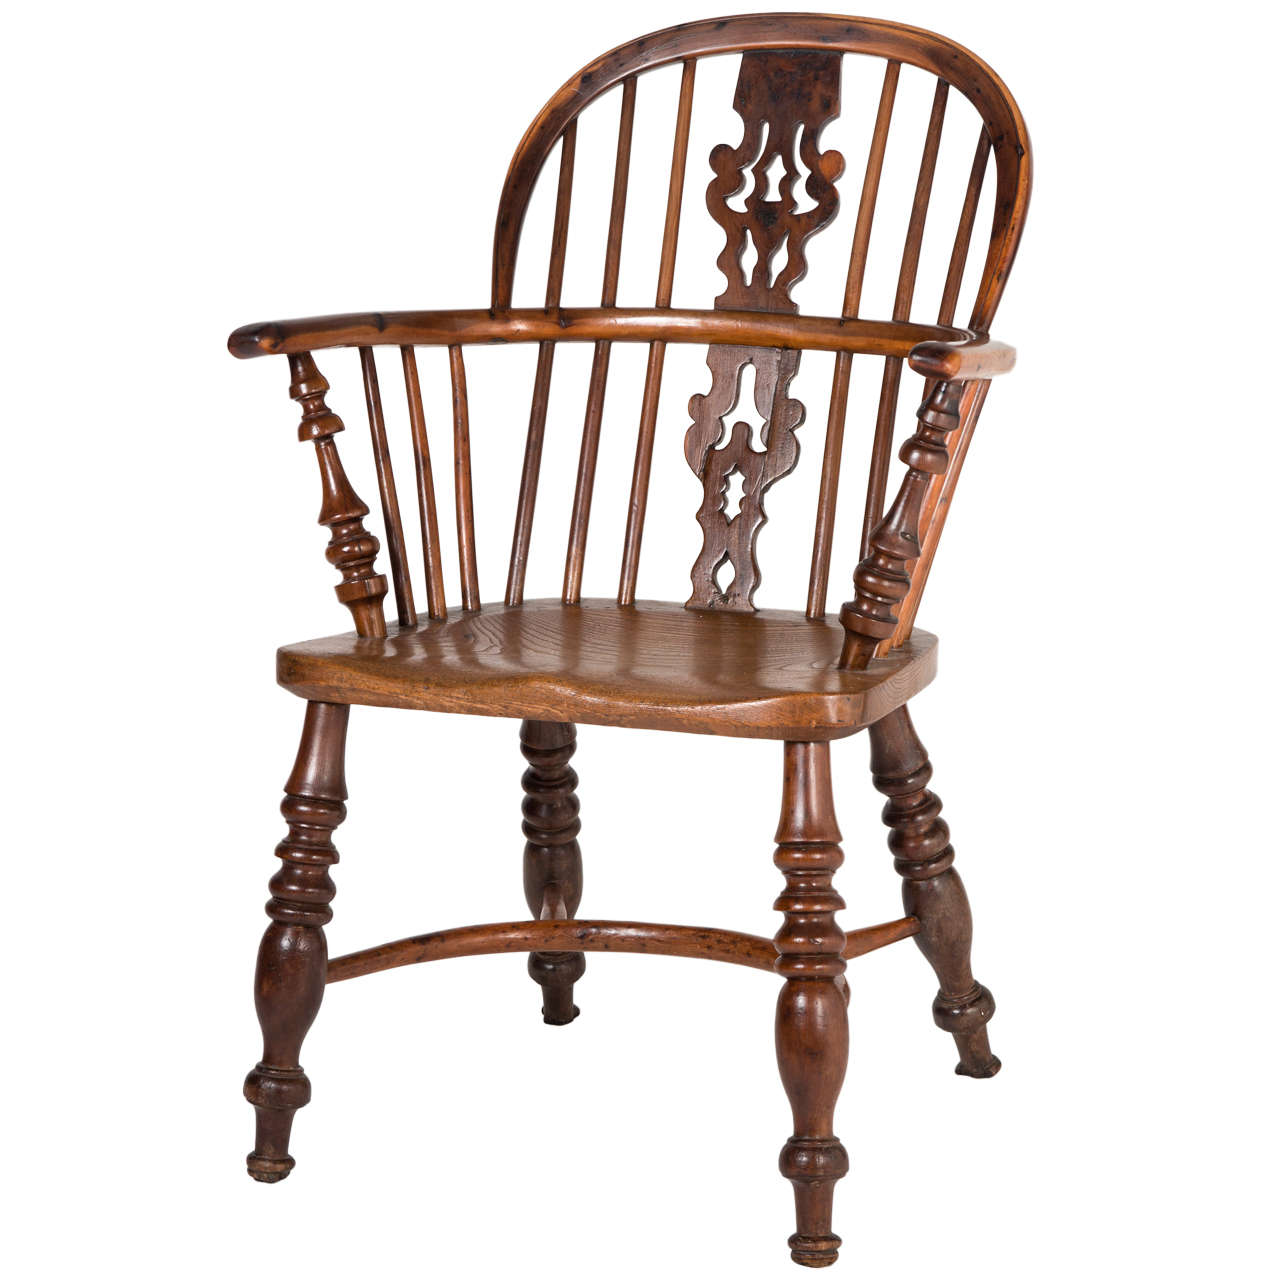 Yew Windsor chair For Sale